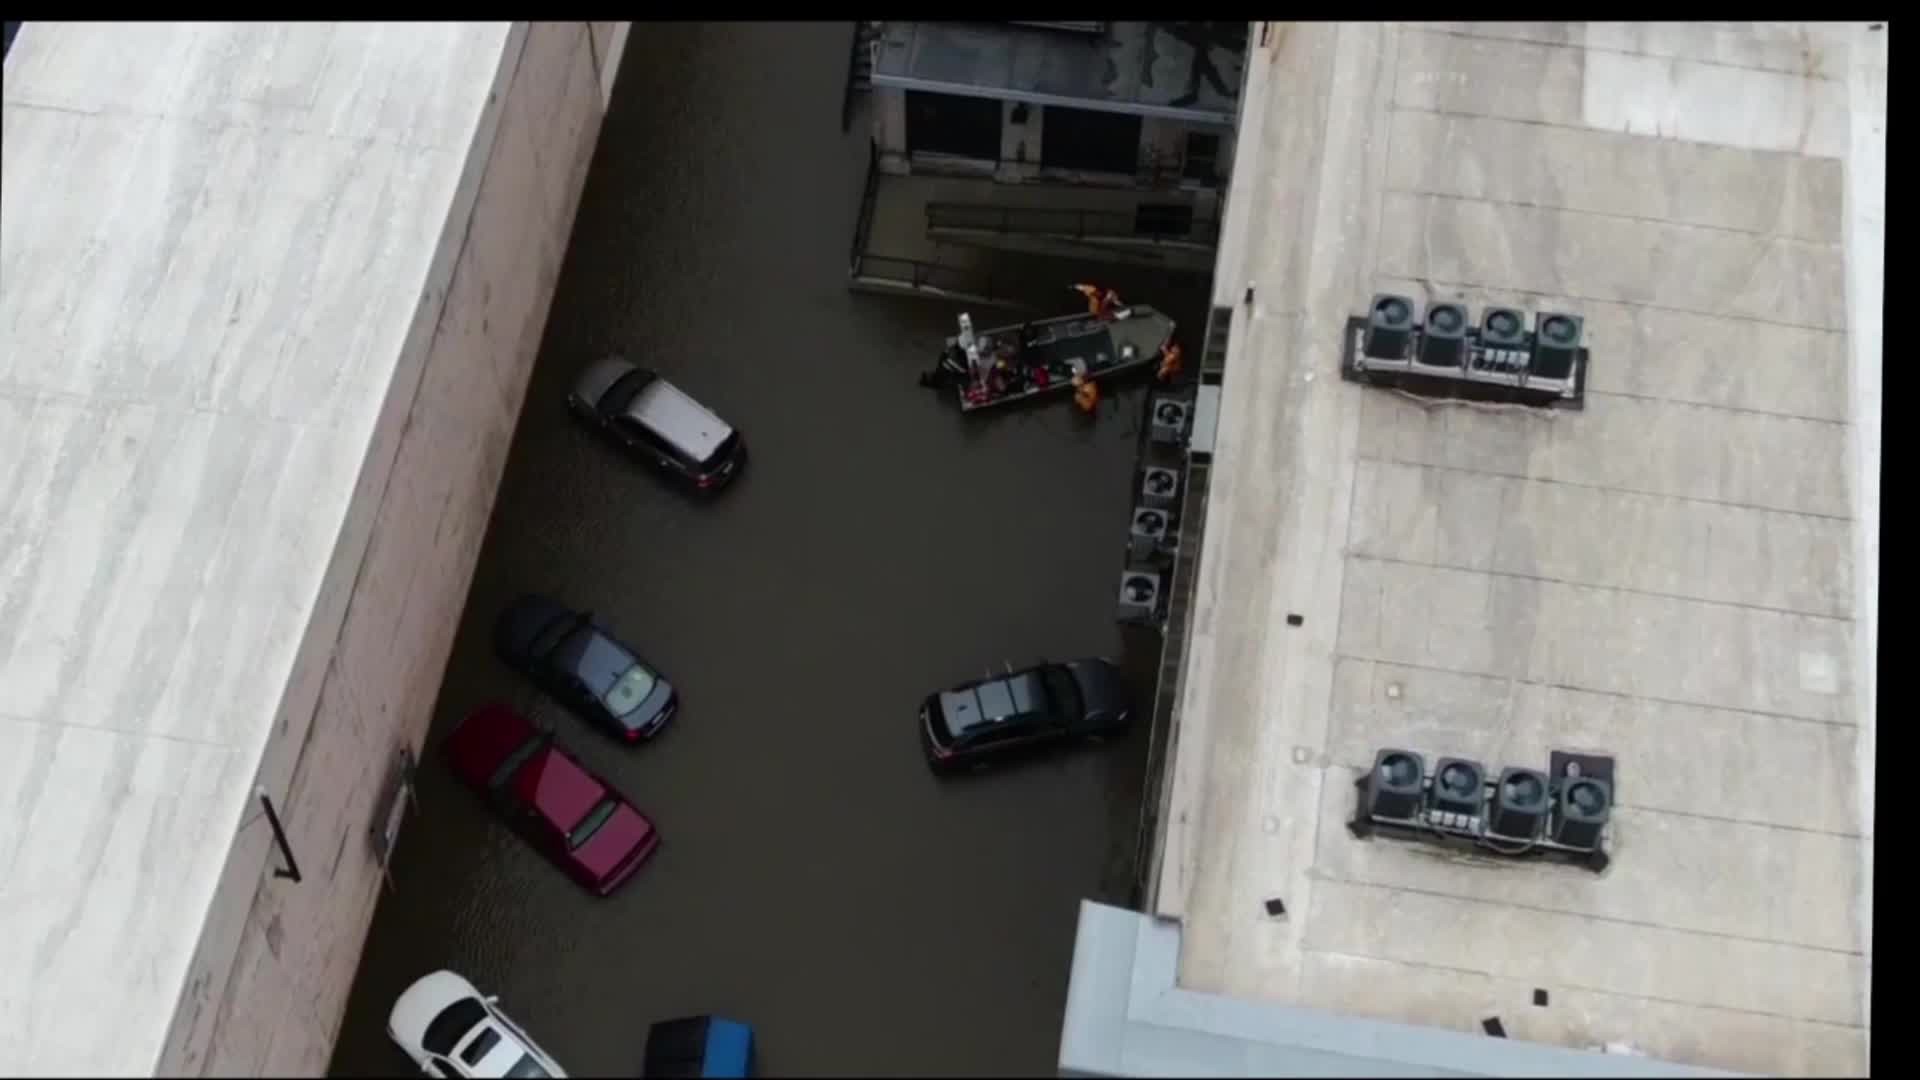 8 In The Air: Cars stuck in flood water